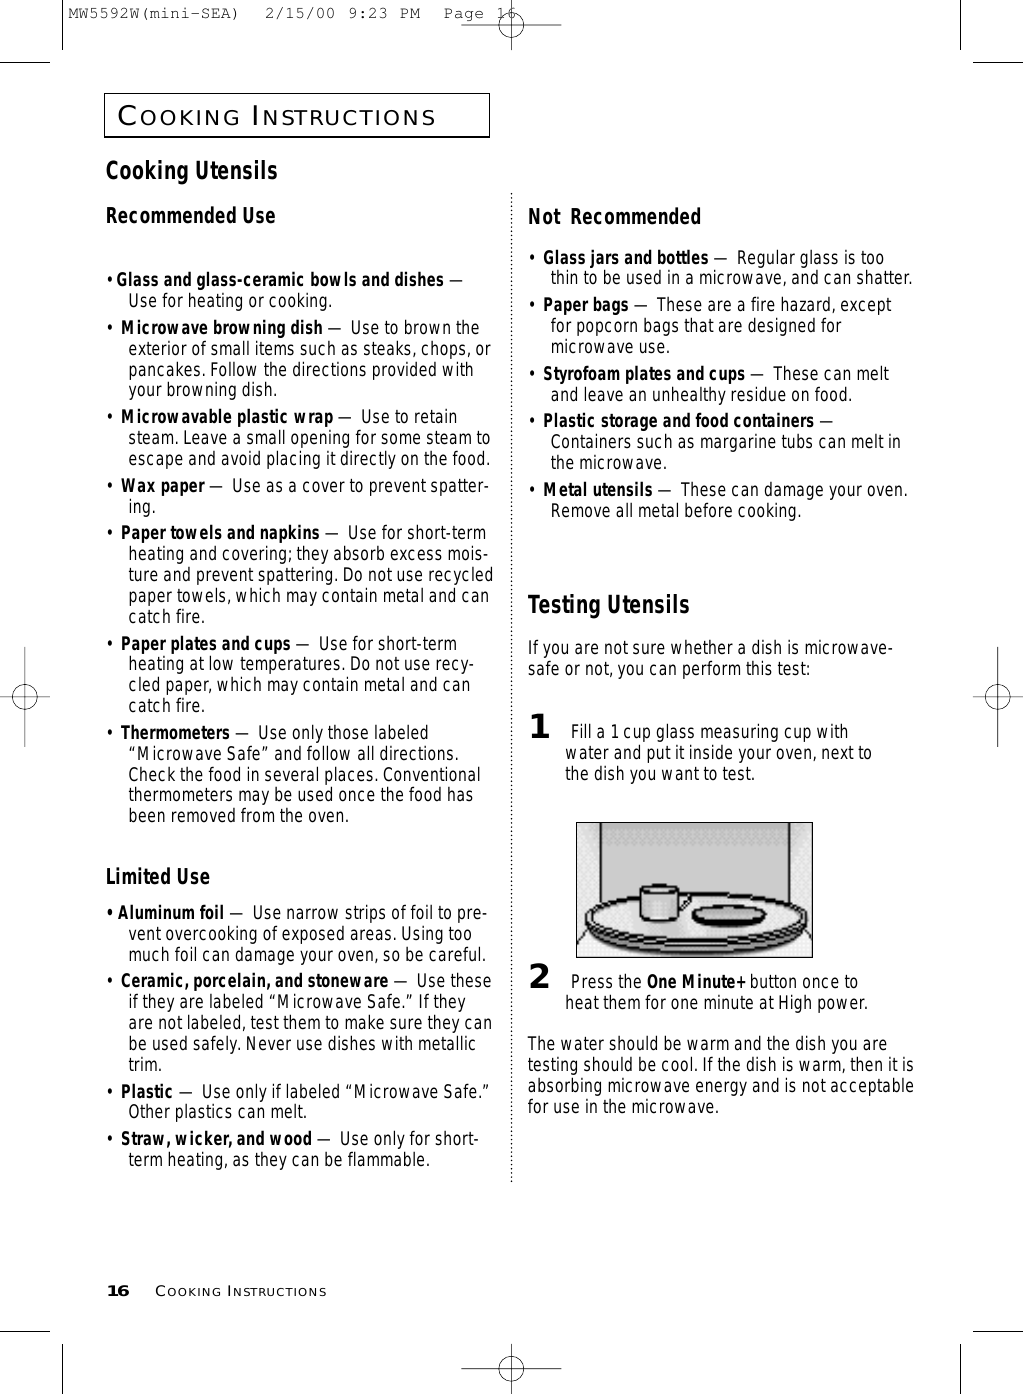 COOKINGINSTRUCTIONS16 COOKINGINSTRUCTIONSCooking UtensilsRecommended Use• Glass and glass-ceramic bowls and dishes —Use for heating or cooking.•  Microwave browning dish — Use to brown theexterior of small items such as steaks, chops, orpancakes. Follow the directions provided withyour browning dish.•  Microwavable plastic wrap — Use to retainsteam. Leave a small opening for some steam toescape and avoid placing it directly on the food.•  Wax paper — Use as a cover to prevent spatter-ing.•  Paper towels and napkins — Use for short-termheating and covering; they absorb excess mois-ture and prevent spattering. Do not use recycledpaper towels, which may contain metal and cancatch fire.•  Paper plates and cups — Use for short-termheating at low temperatures. Do not use recy-cled paper, which may contain metal and cancatch fire.•  Thermometers — Use only those labeled“Microwave Safe” and follow all directions.Check the food in several places. Conventionalthermometers may be used once the food hasbeen removed from the oven.Limited Use• Aluminum foil — Use narrow strips of foil to pre-vent overcooking of exposed areas. Using toomuch foil can damage your oven, so be careful.•  Ceramic, porcelain, and stoneware — Use theseif they are labeled “Microwave Safe.” If theyare not labeled, test them to make sure they canbe used safely. Never use dishes with metallictrim.•  Plastic — Use only if labeled “Microwave Safe.”Other plastics can melt.•  Straw, wicker, and wood — Use only for short-term heating, as they can be flammable.Not  Recommended•  Glass jars and bottles — Regular glass is toothin to be used in a microwave, and can shatter.•  Paper bags — These are a fire hazard, exceptfor popcorn bags that are designed formicrowave use.•  Styrofoam plates and cups — These can meltand leave an unhealthy residue on food.•  Plastic storage and food containers —Containers such as margarine tubs can melt inthe microwave.•  Metal utensils — These can damage your oven.Remove all metal before cooking. Testing UtensilsIf you are not sure whether a dish is microwave-safe or not, you can perform this test:1Fill a 1 cup glass measuring cup withwater and put it inside your oven, next tothe dish you want to test.2Press the One Minute+ button once toheat them for one minute at High power.The water should be warm and the dish you aretesting should be cool. If the dish is warm, then it isabsorbing microwave energy and is not acceptablefor use in the microwave.MW5592W(mini-SEA)  2/15/00 9:23 PM  Page 16